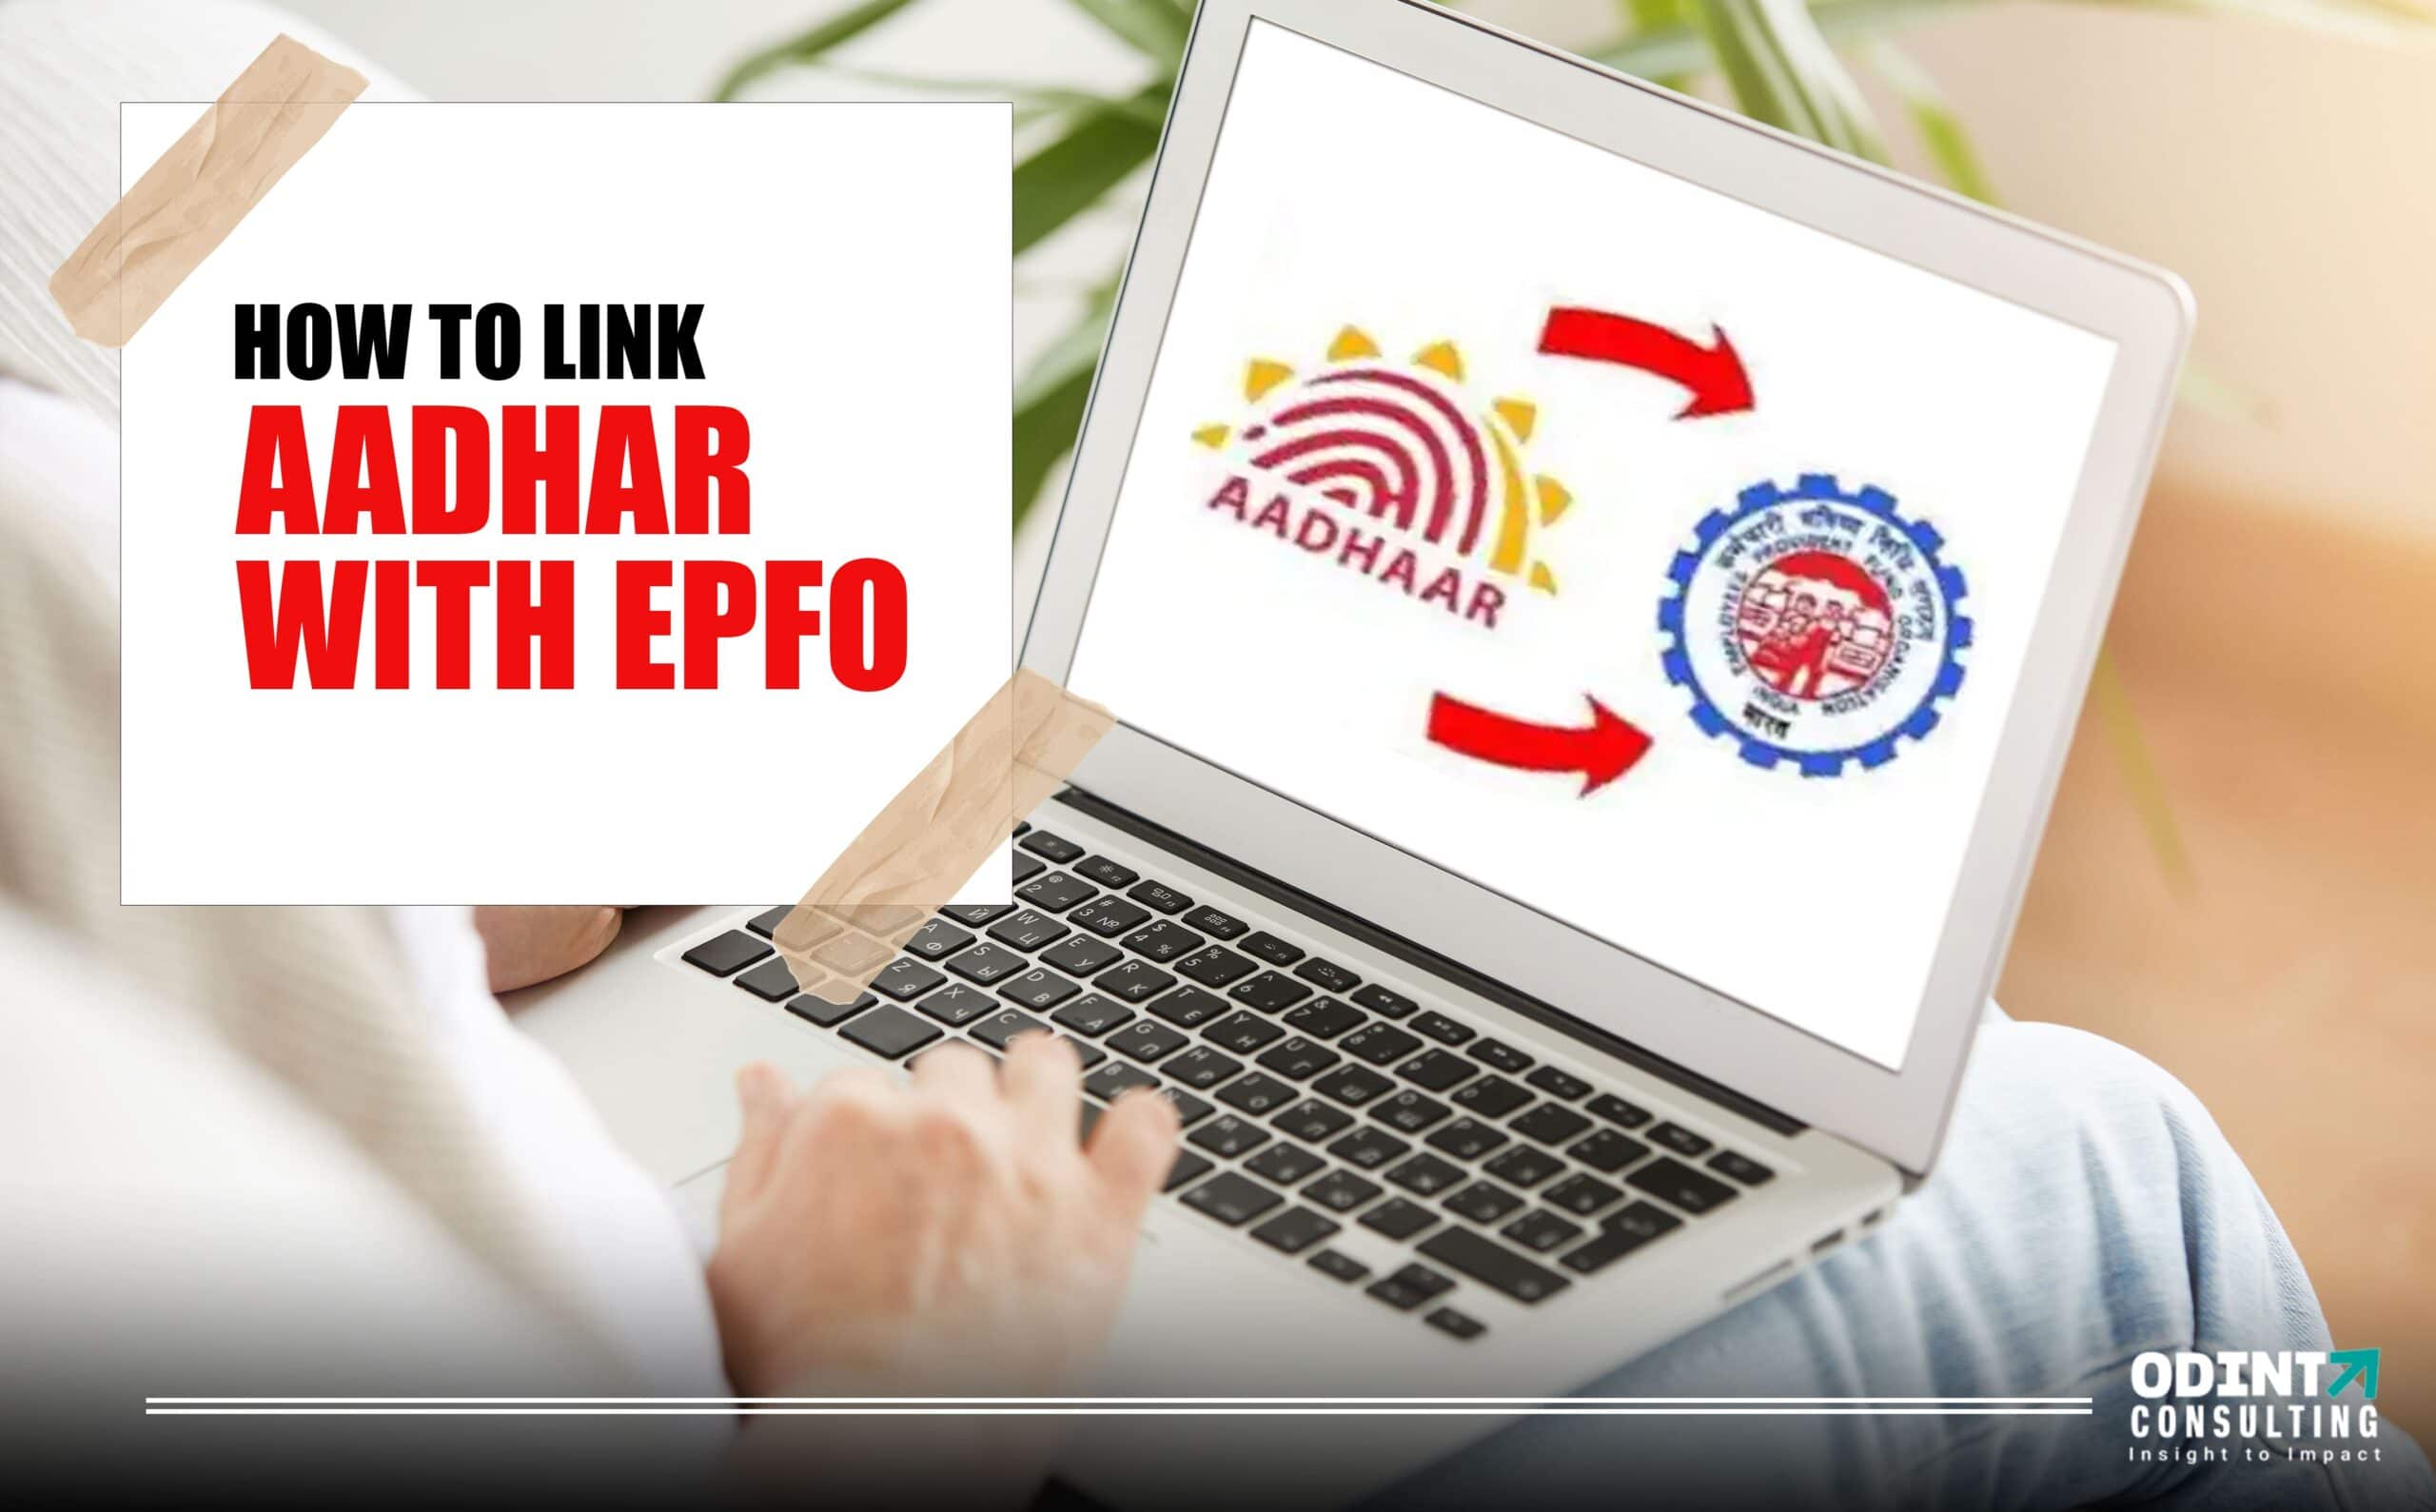 How to Link Aadhaar with EPFO in India 2022: Complete Guide